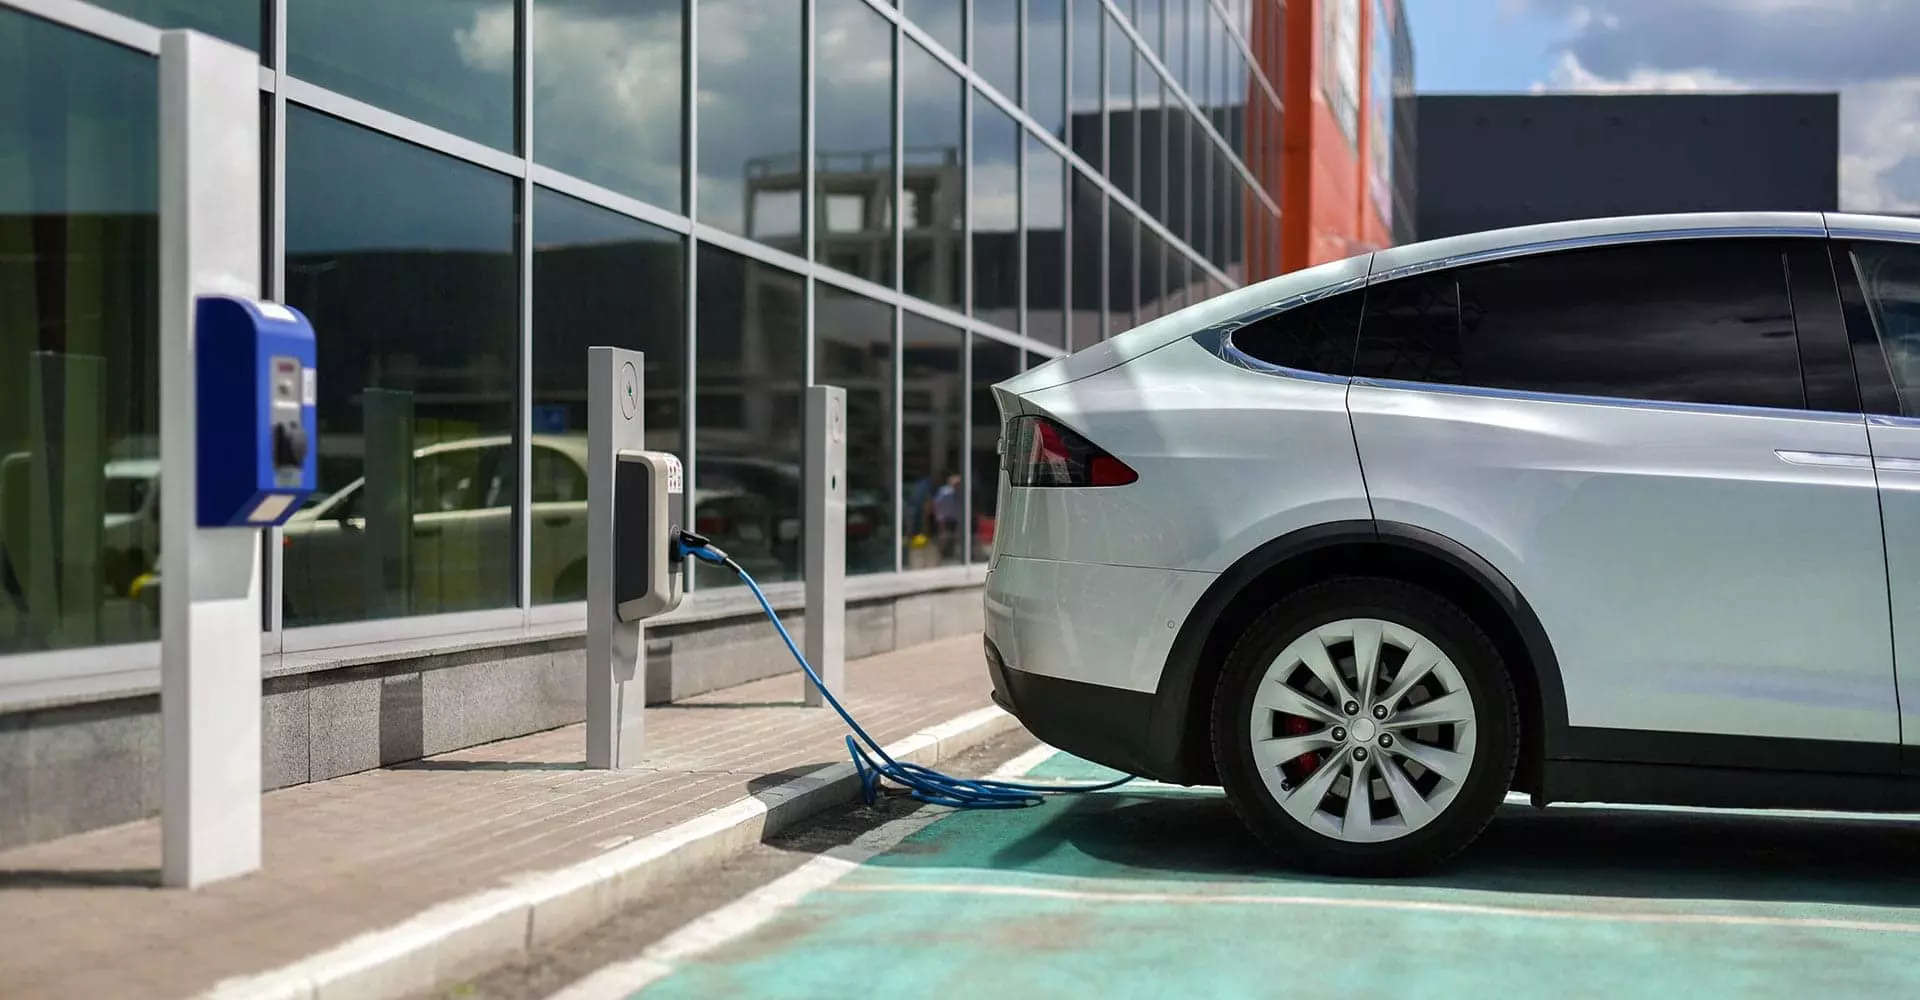 Research shows that 90 per cent of EVs are charged at home or workplace.